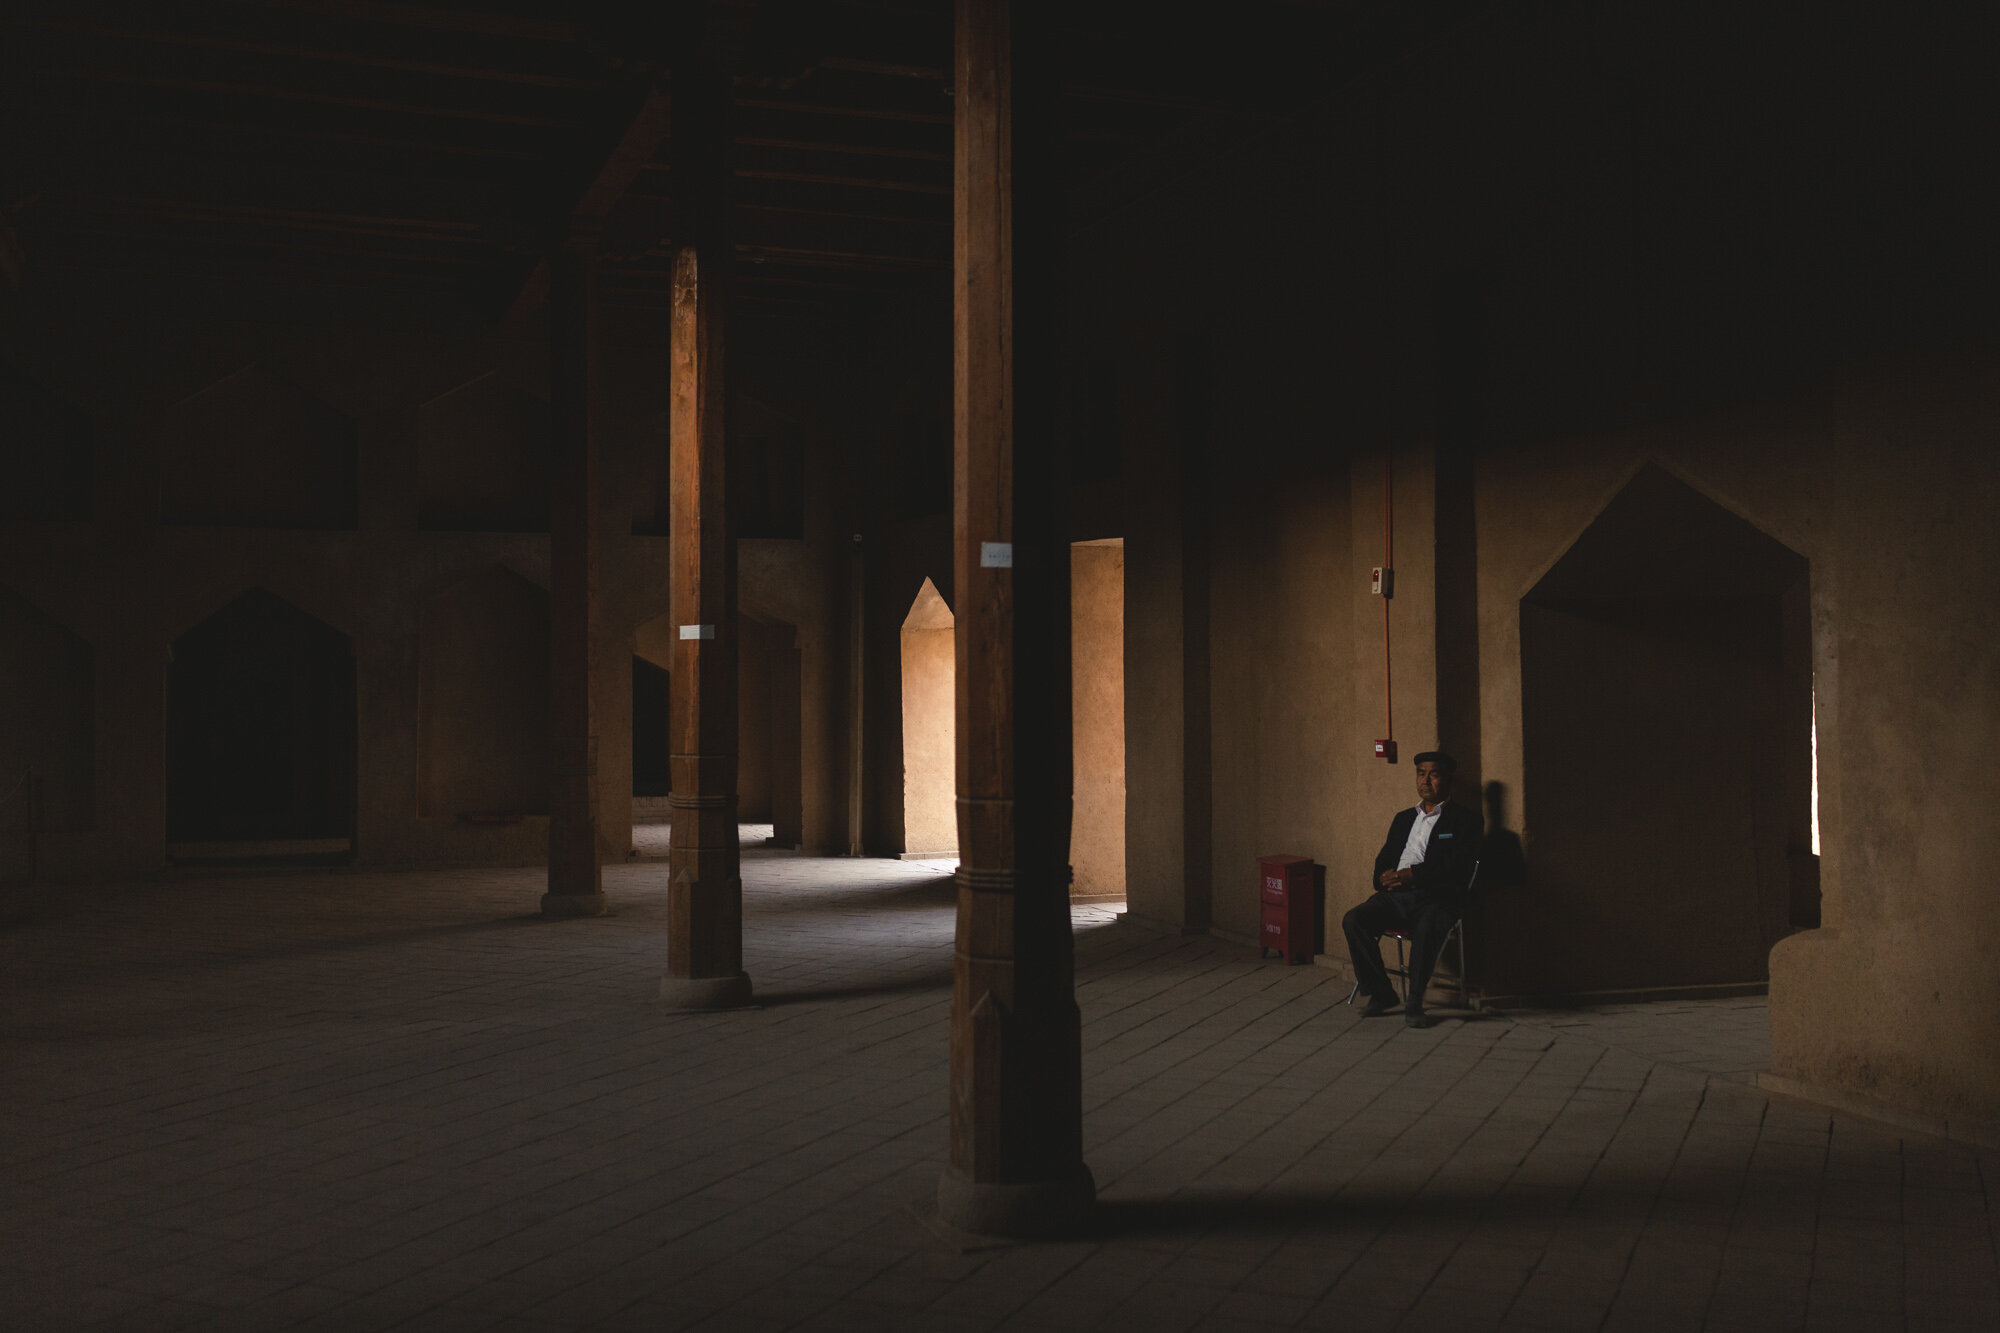  September 26th 2019. Turpan, Xinjiang province, China. Inside the Emin Mosque. The mosque has now become a tourist site. 